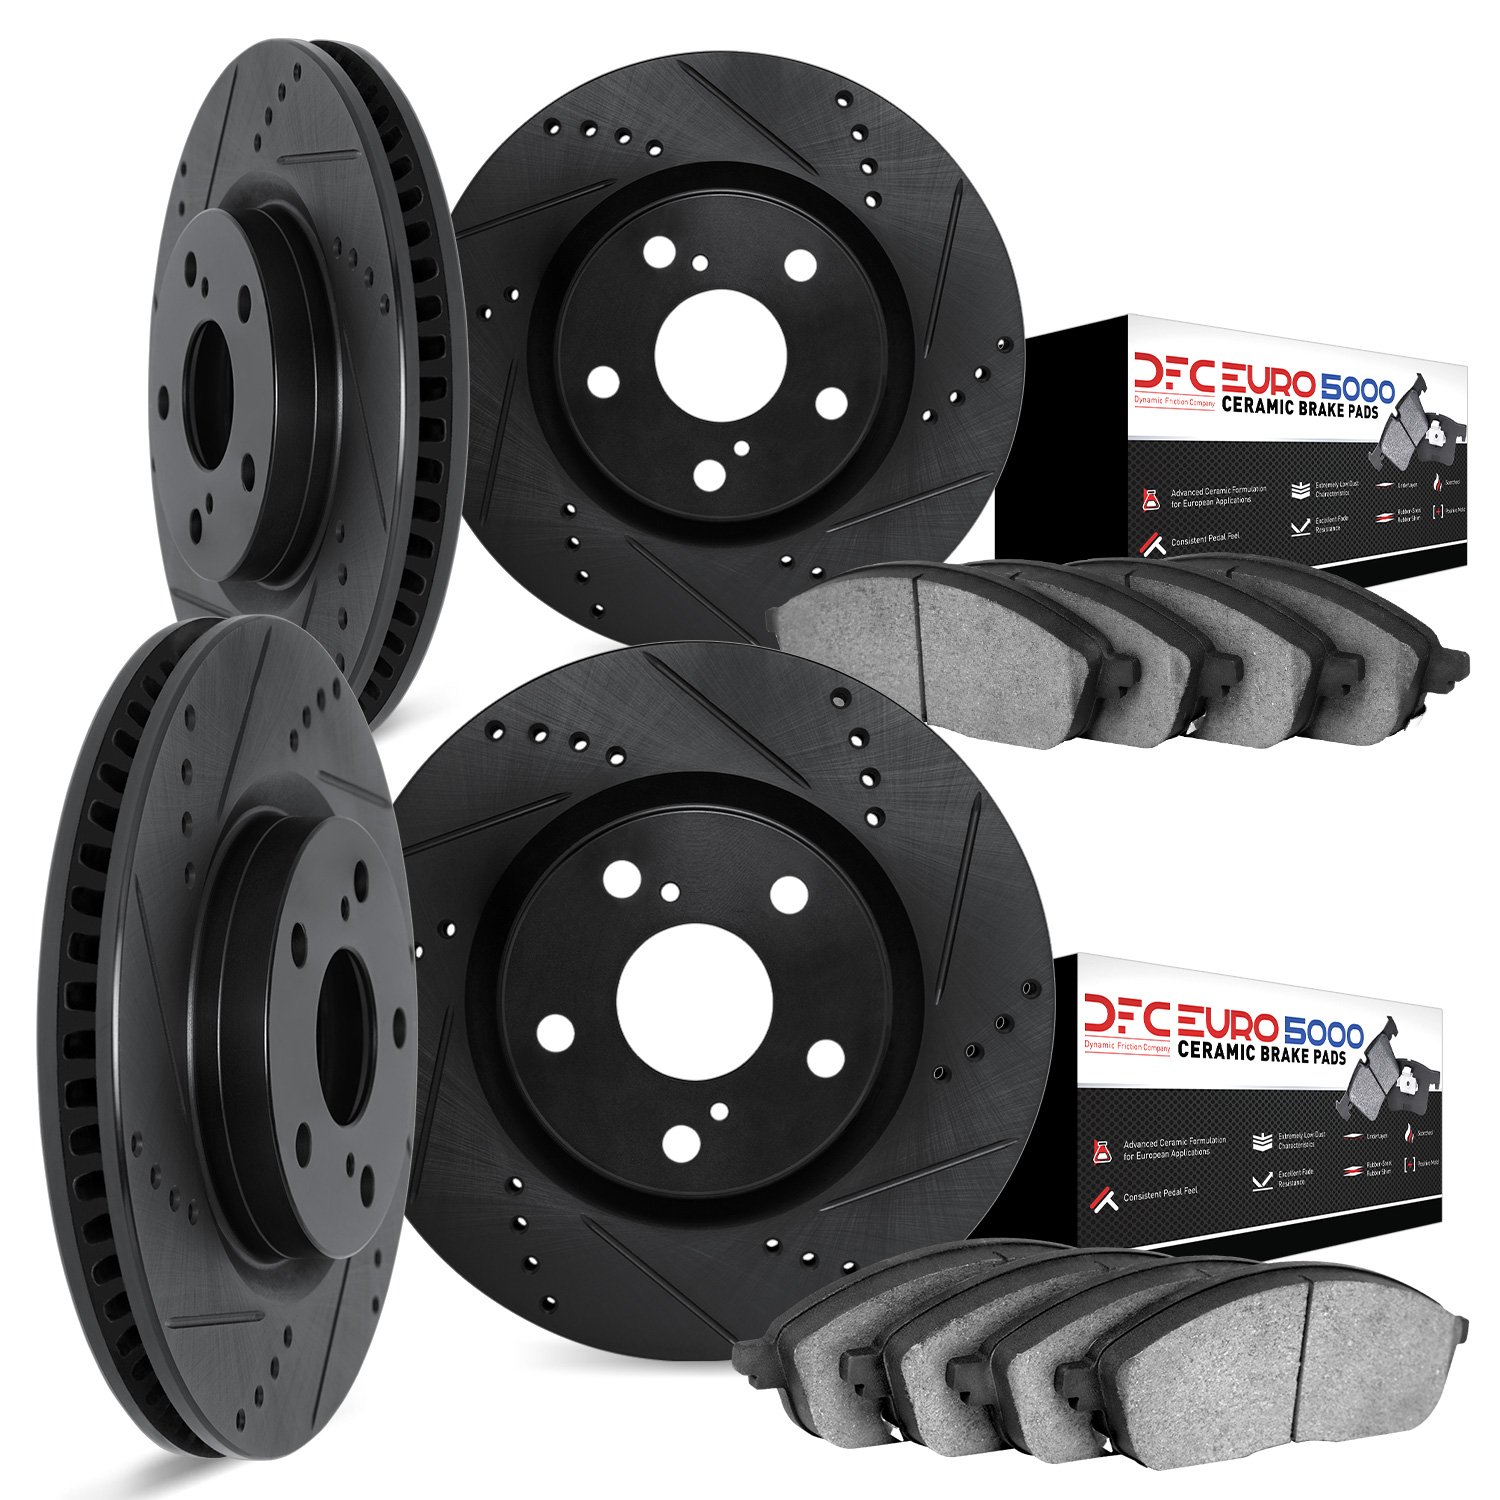 8604-31013 Drilled/Slotted Brake Rotors w/5000 Euro Ceramic Brake Pads Kit [Black], 1995-2001 BMW, Position: Front and Rear